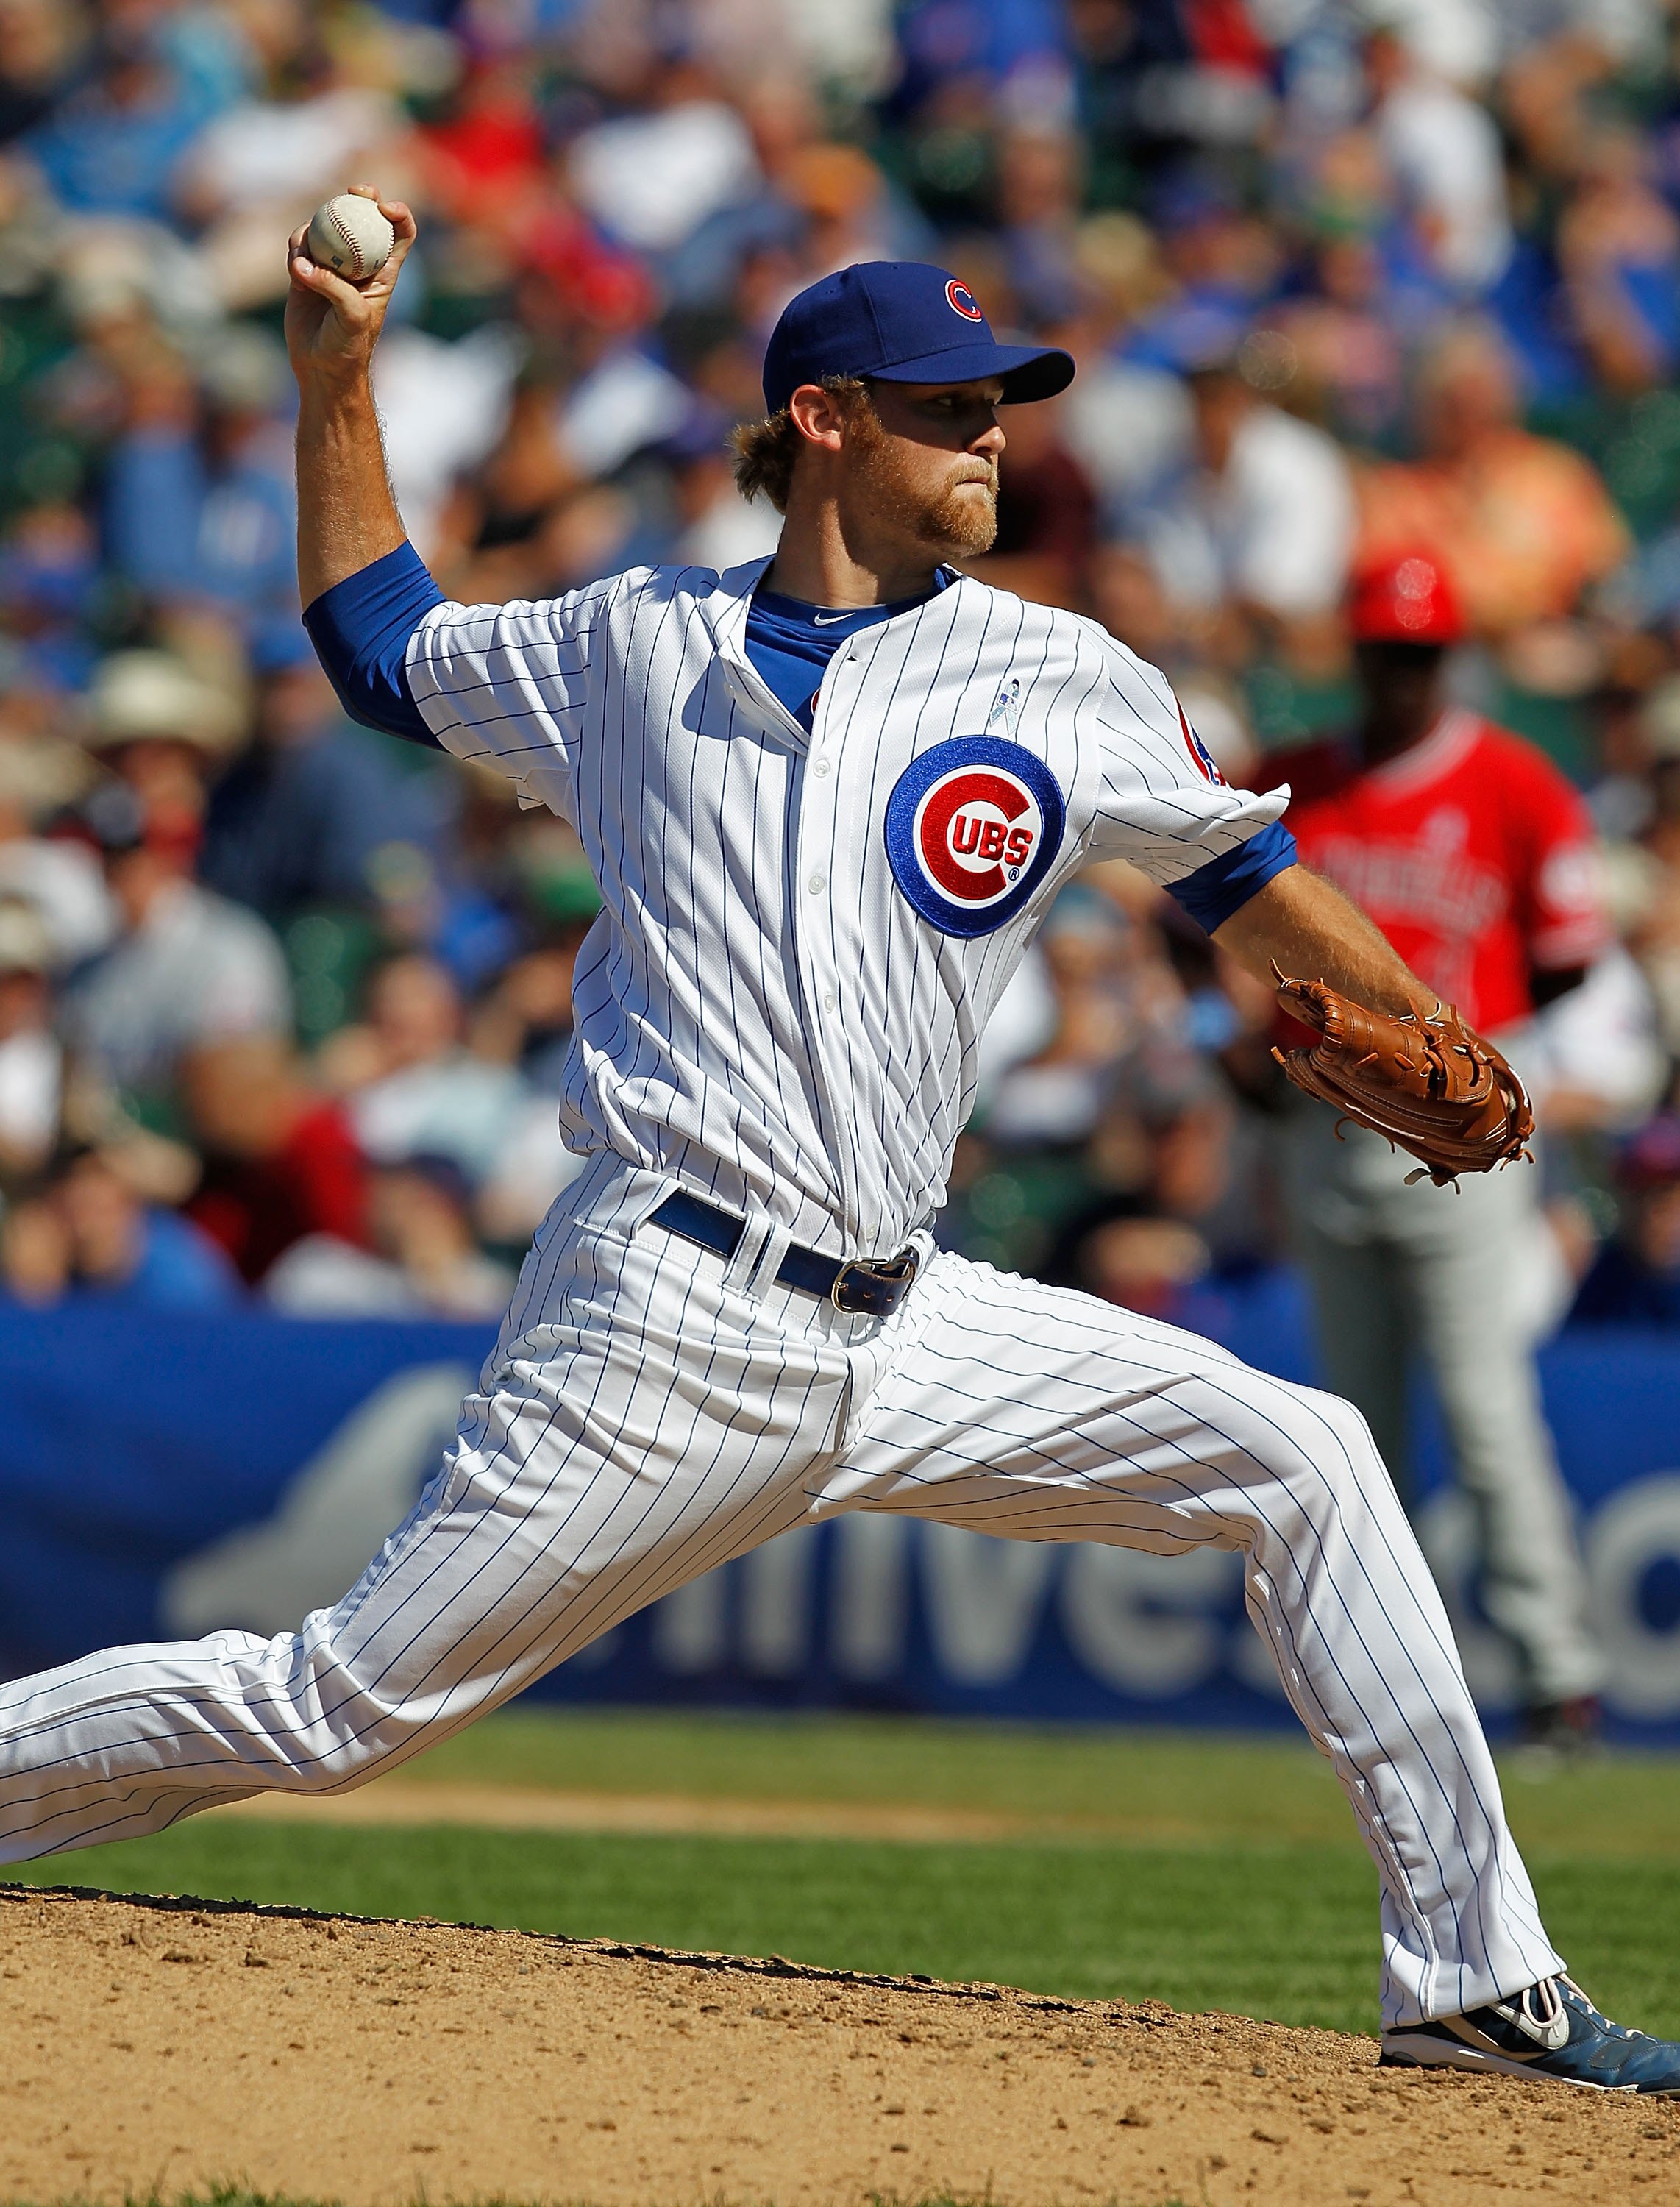 Kerry Wood of Chicago Cubs retires after career filled with thrills,  injuries (with video) 